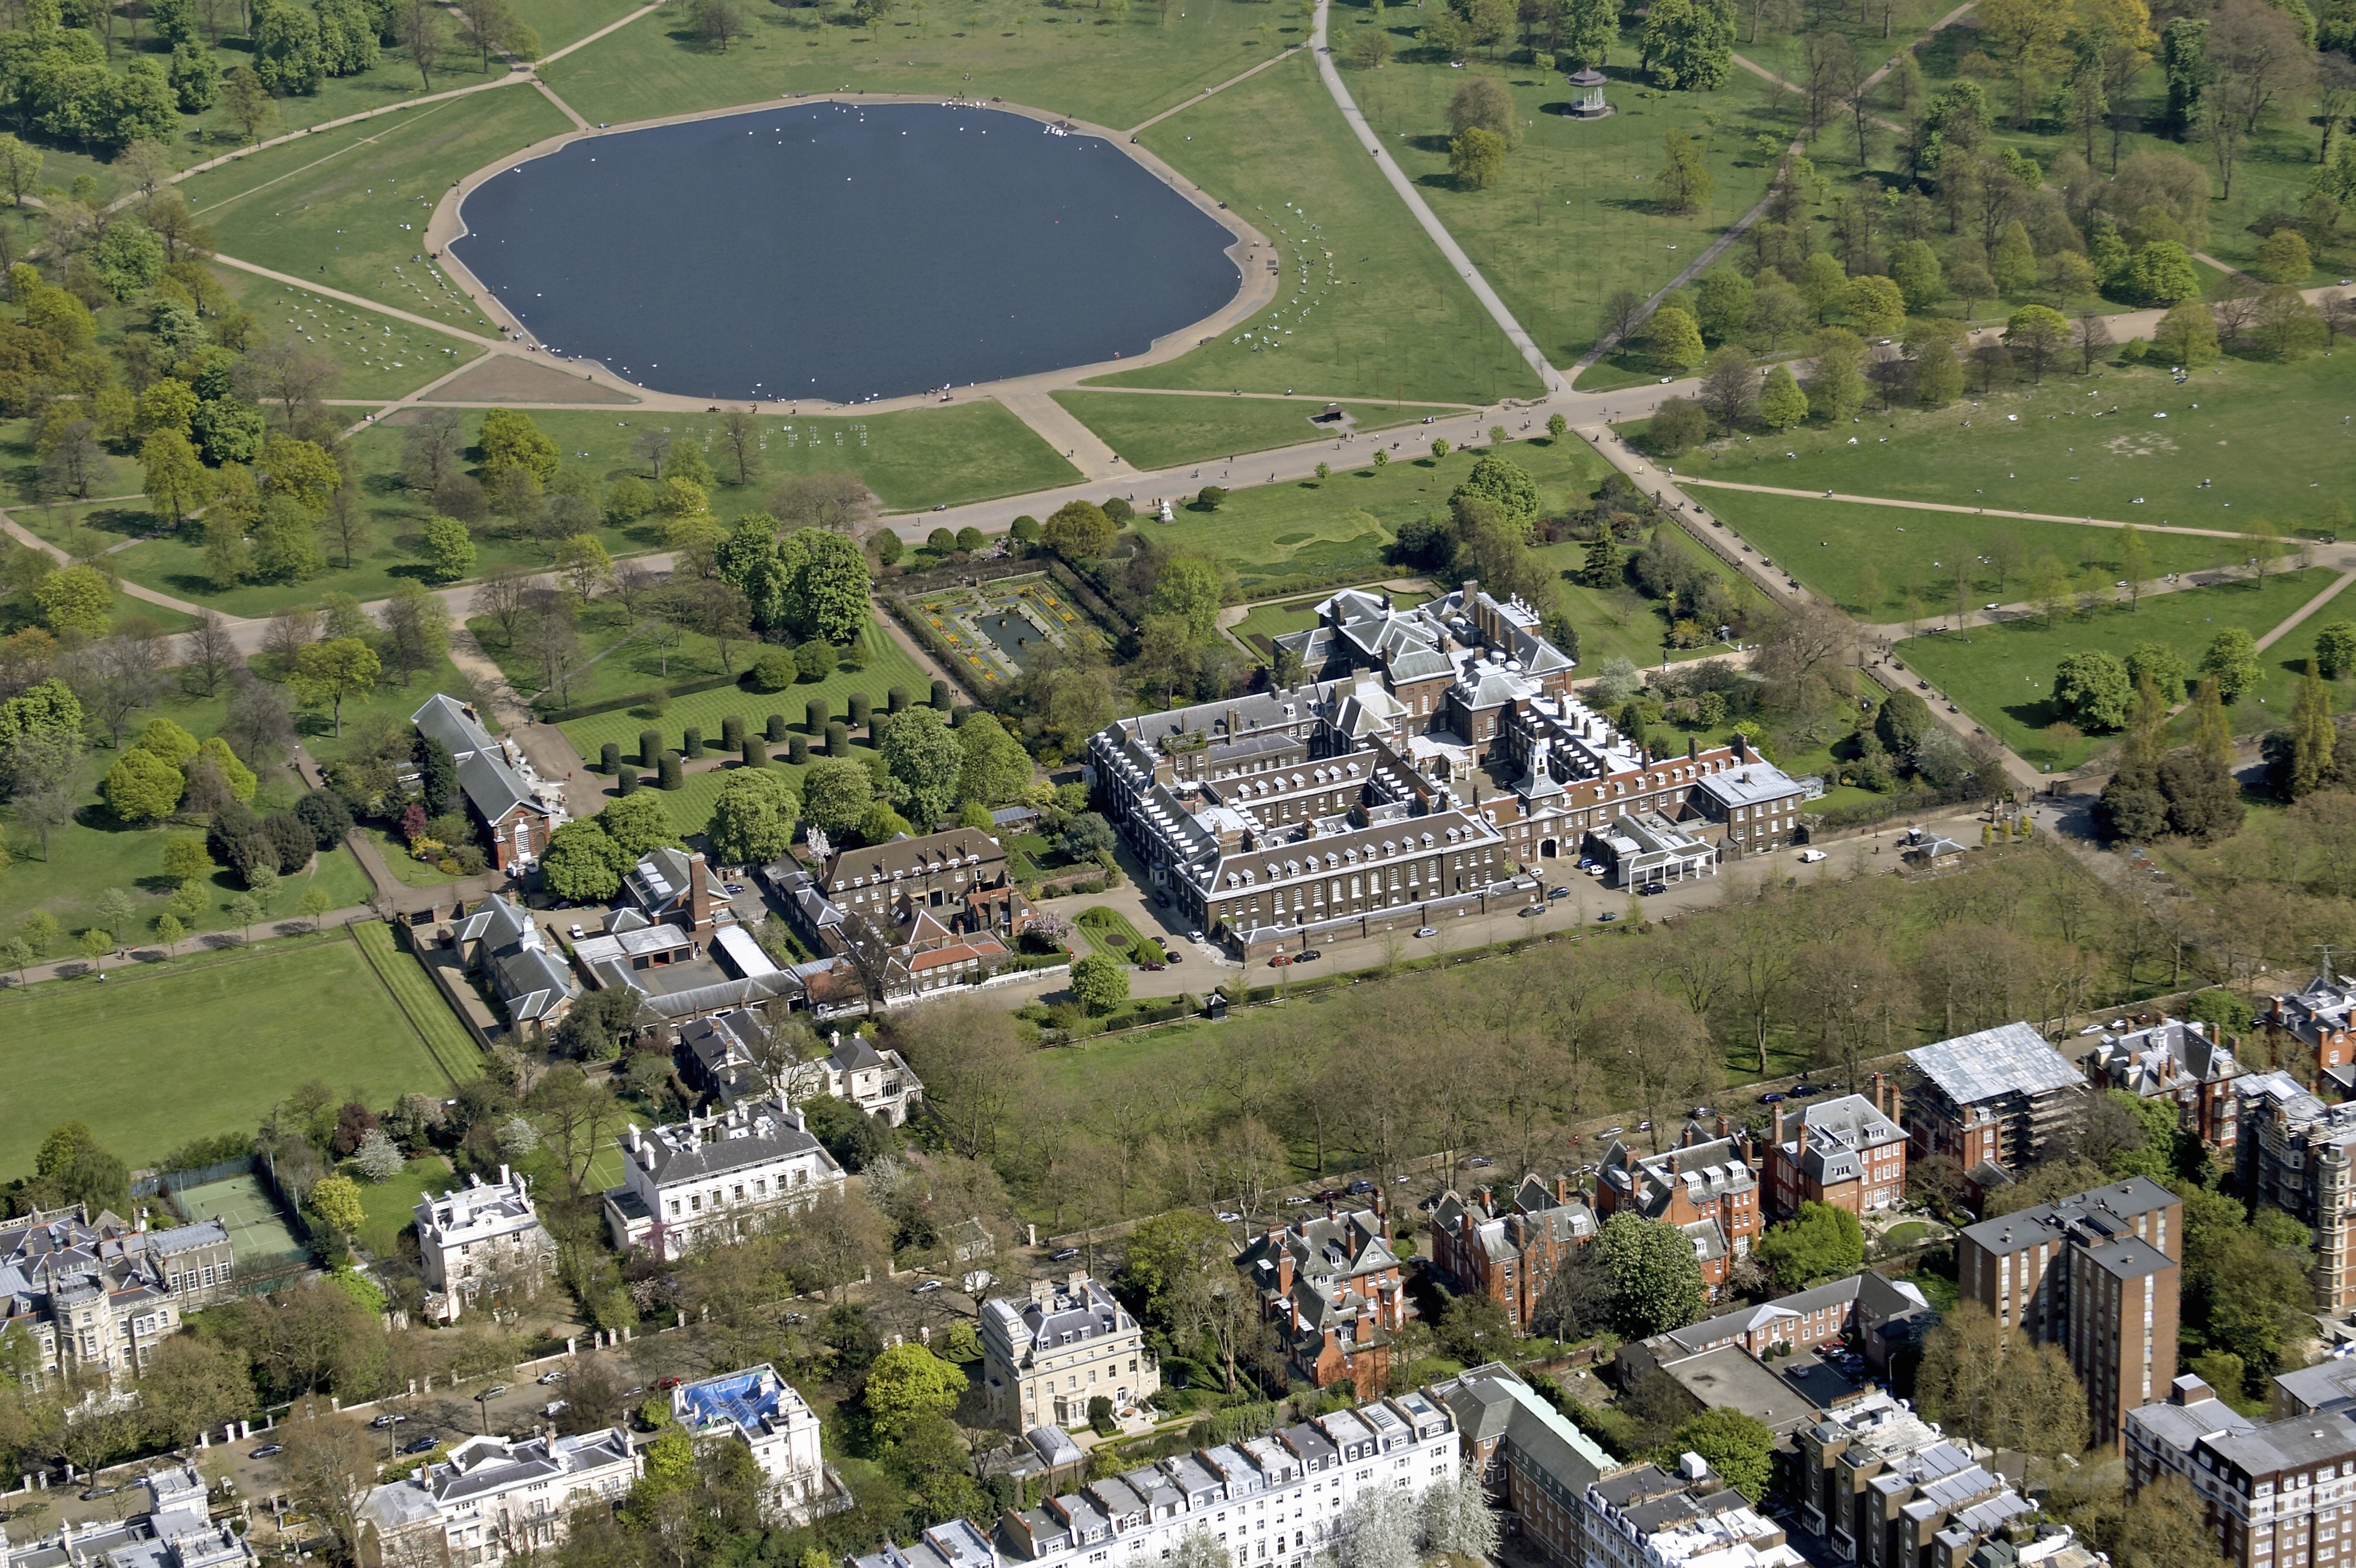 Pictured: An ariel view of Kensington Palace and Kensington Gardens, London, England | Photo: Getty Images